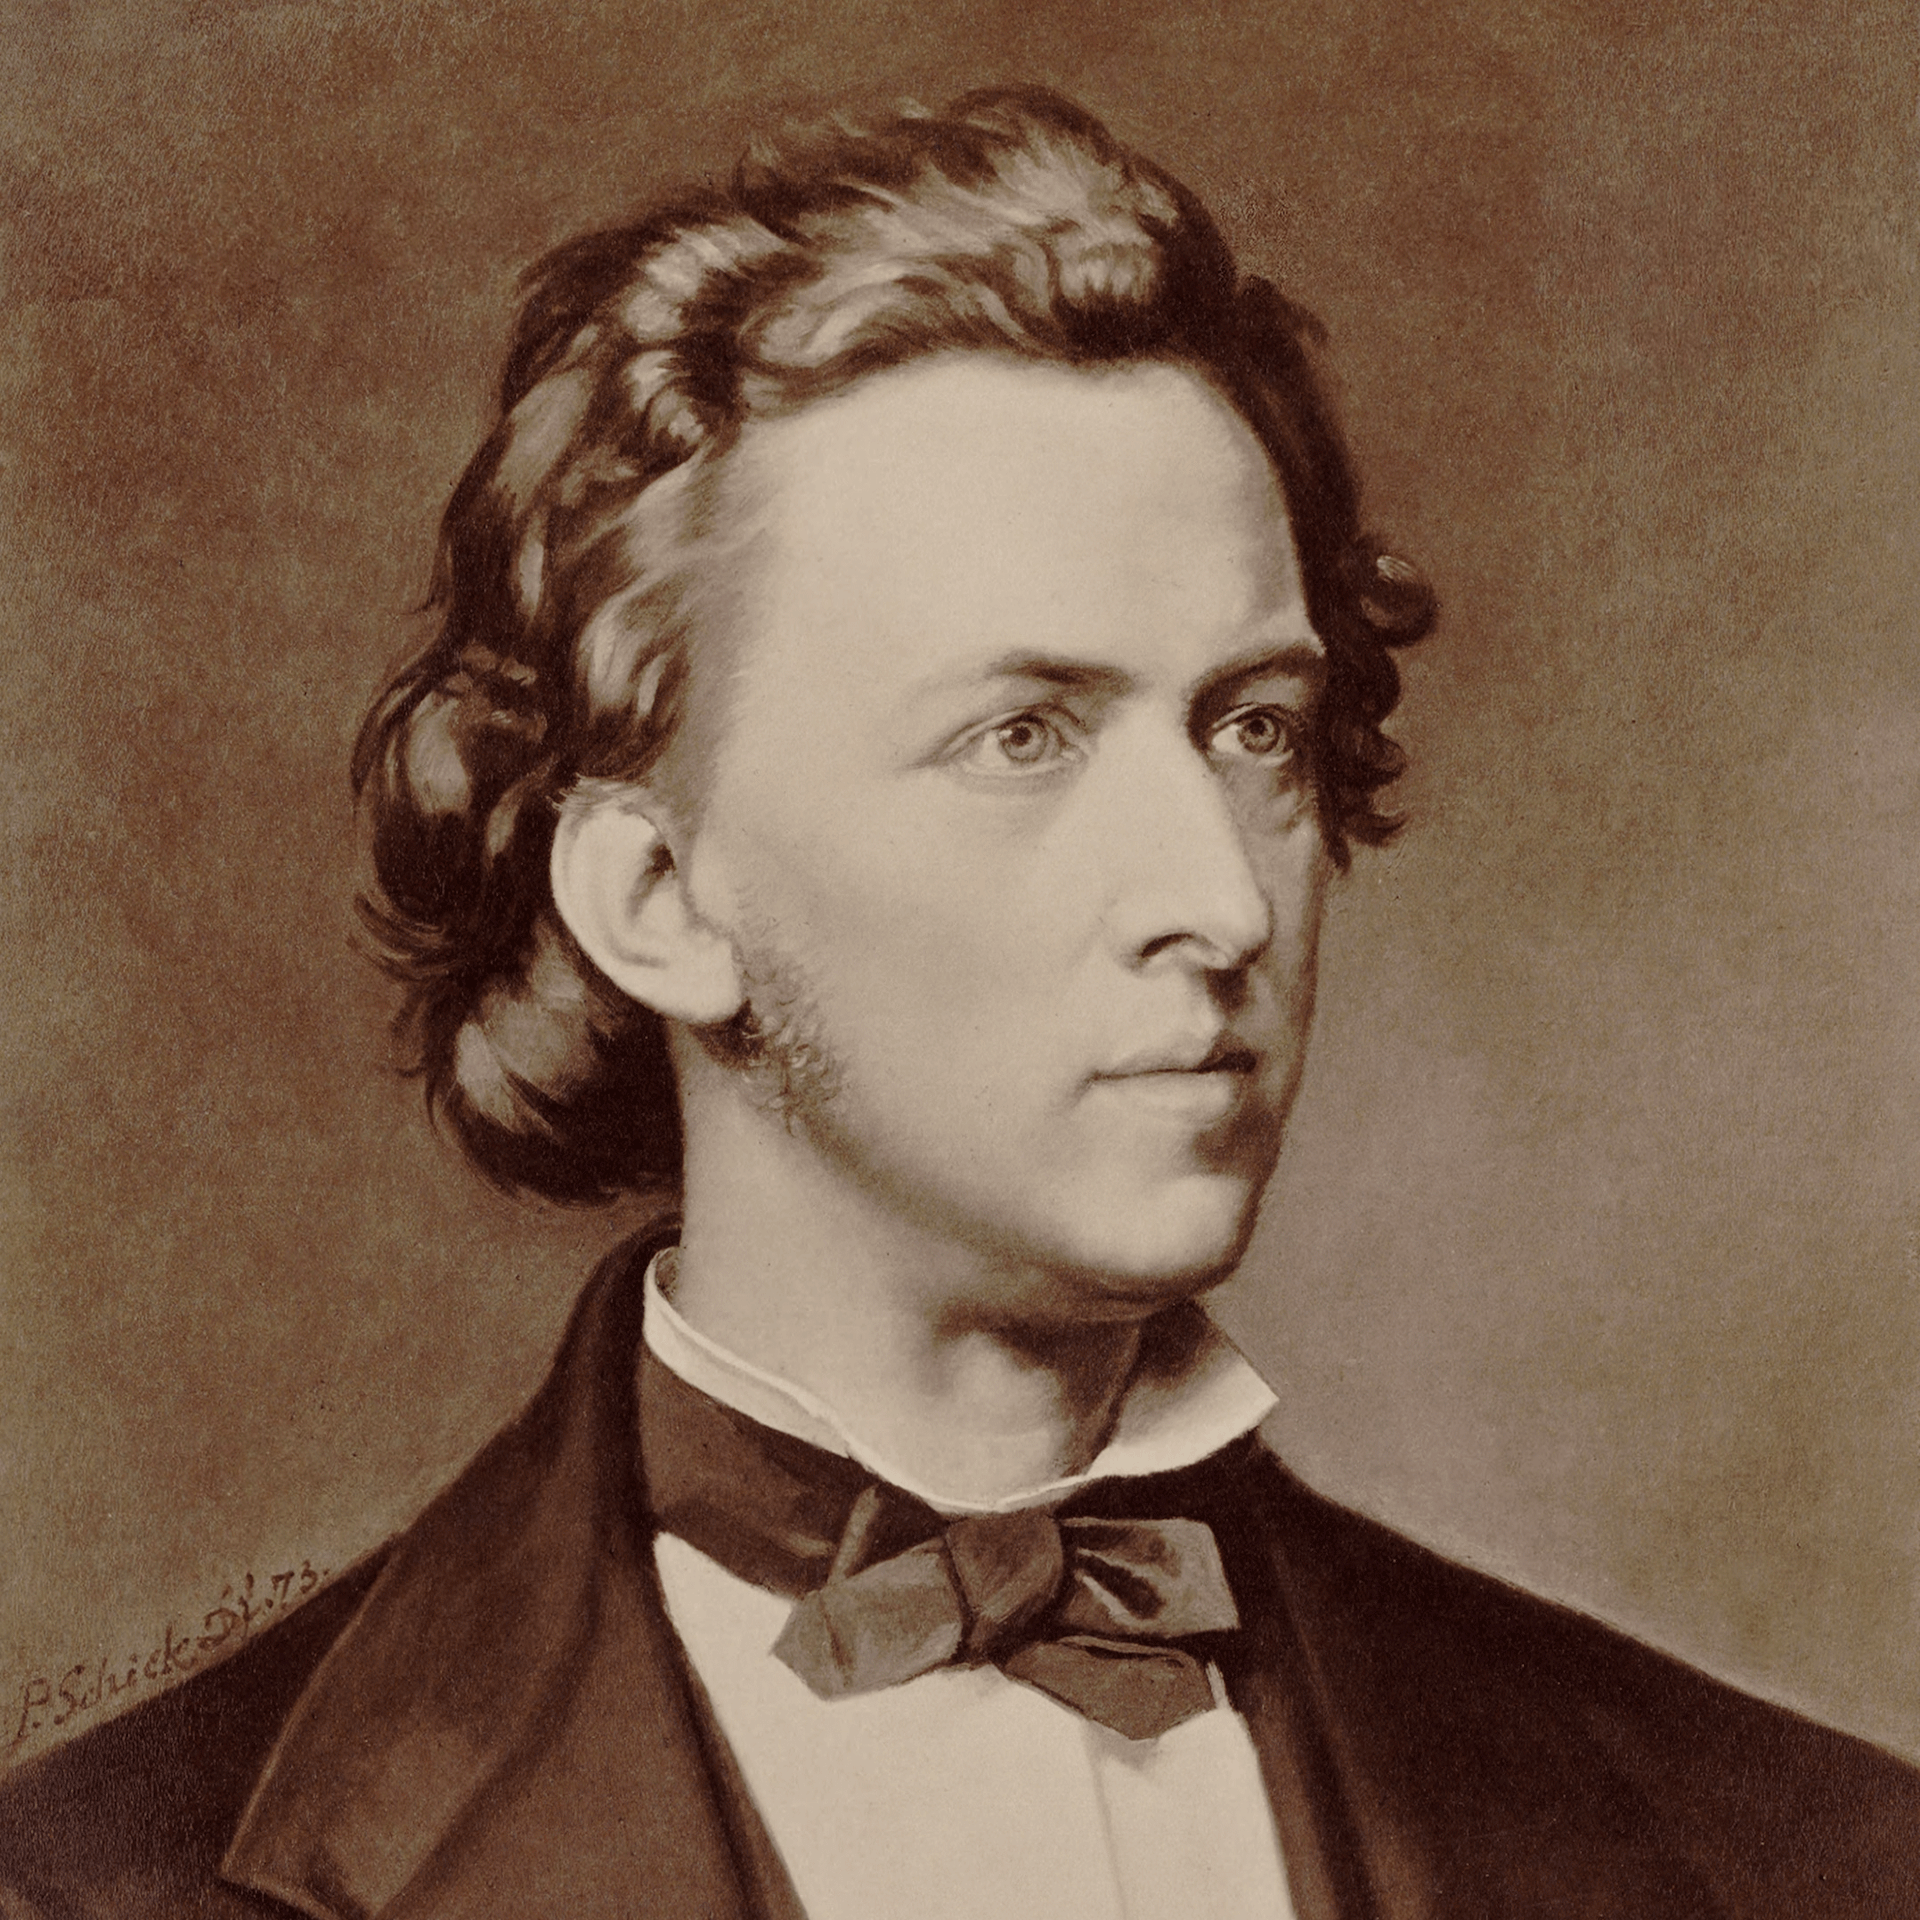 Frédéric Chopin: biography, videos, works & important dates.